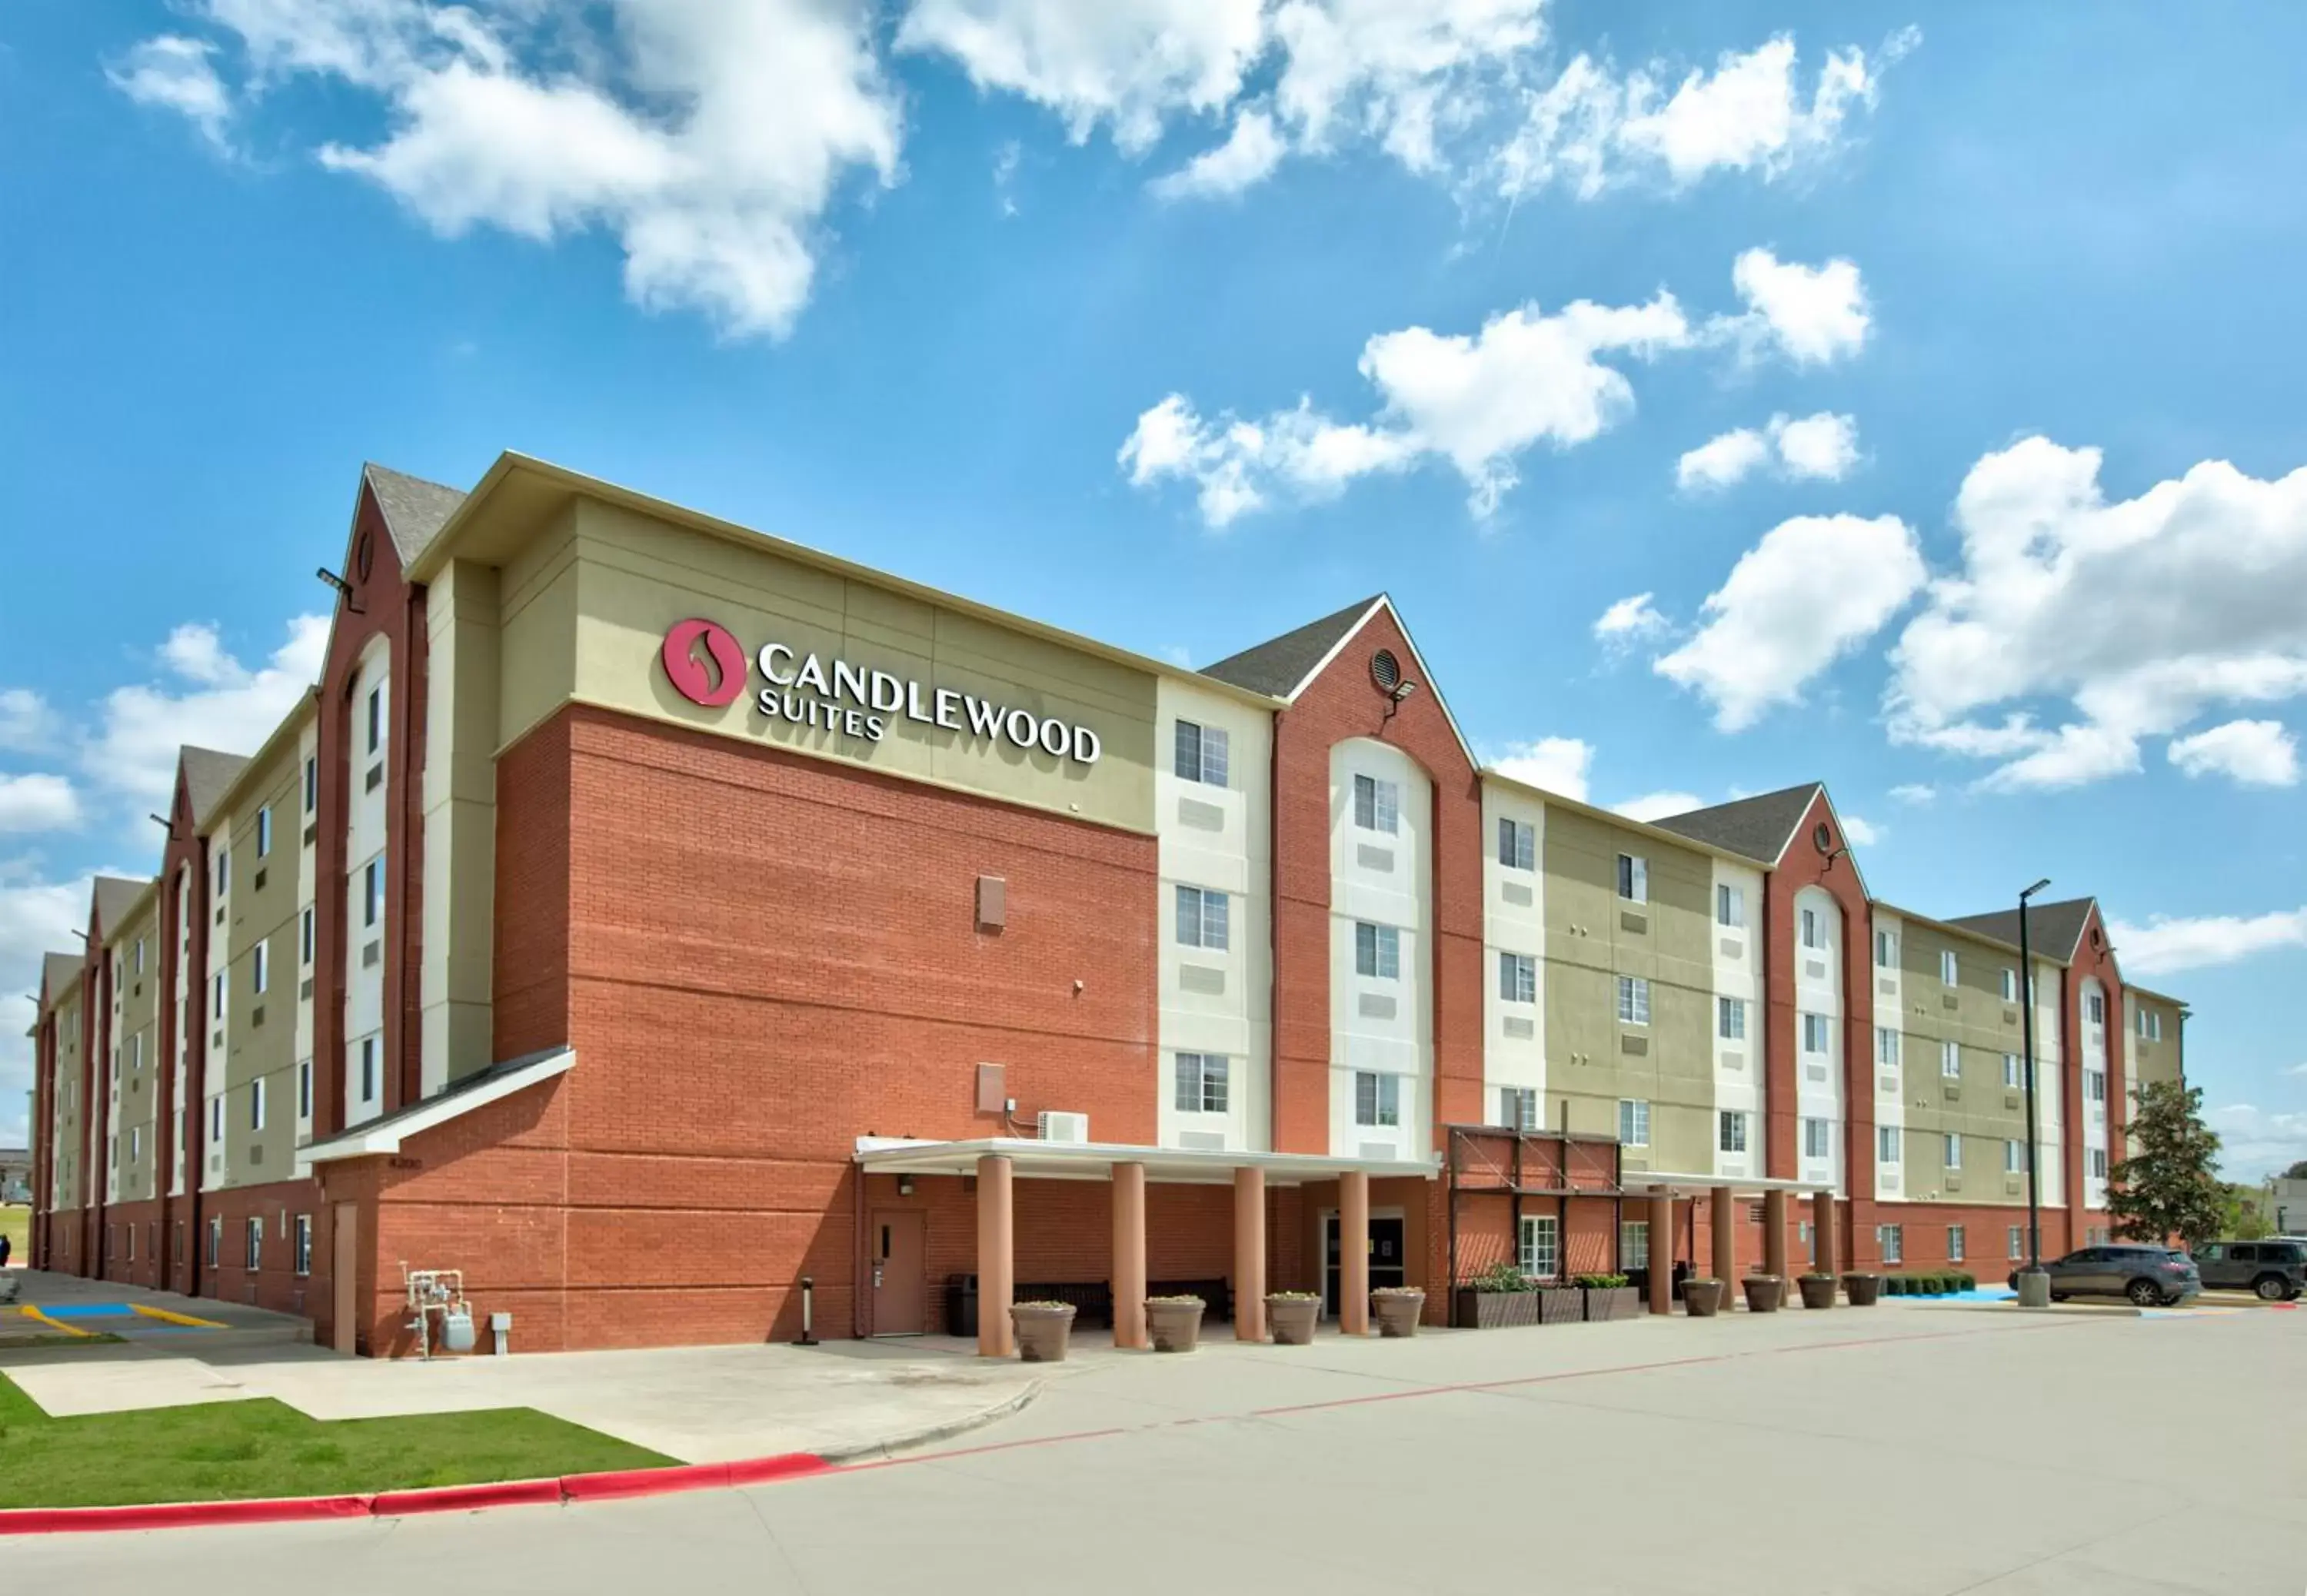 Property building in Candlewood Suites Dallas Fort Worth South, an IHG Hotel